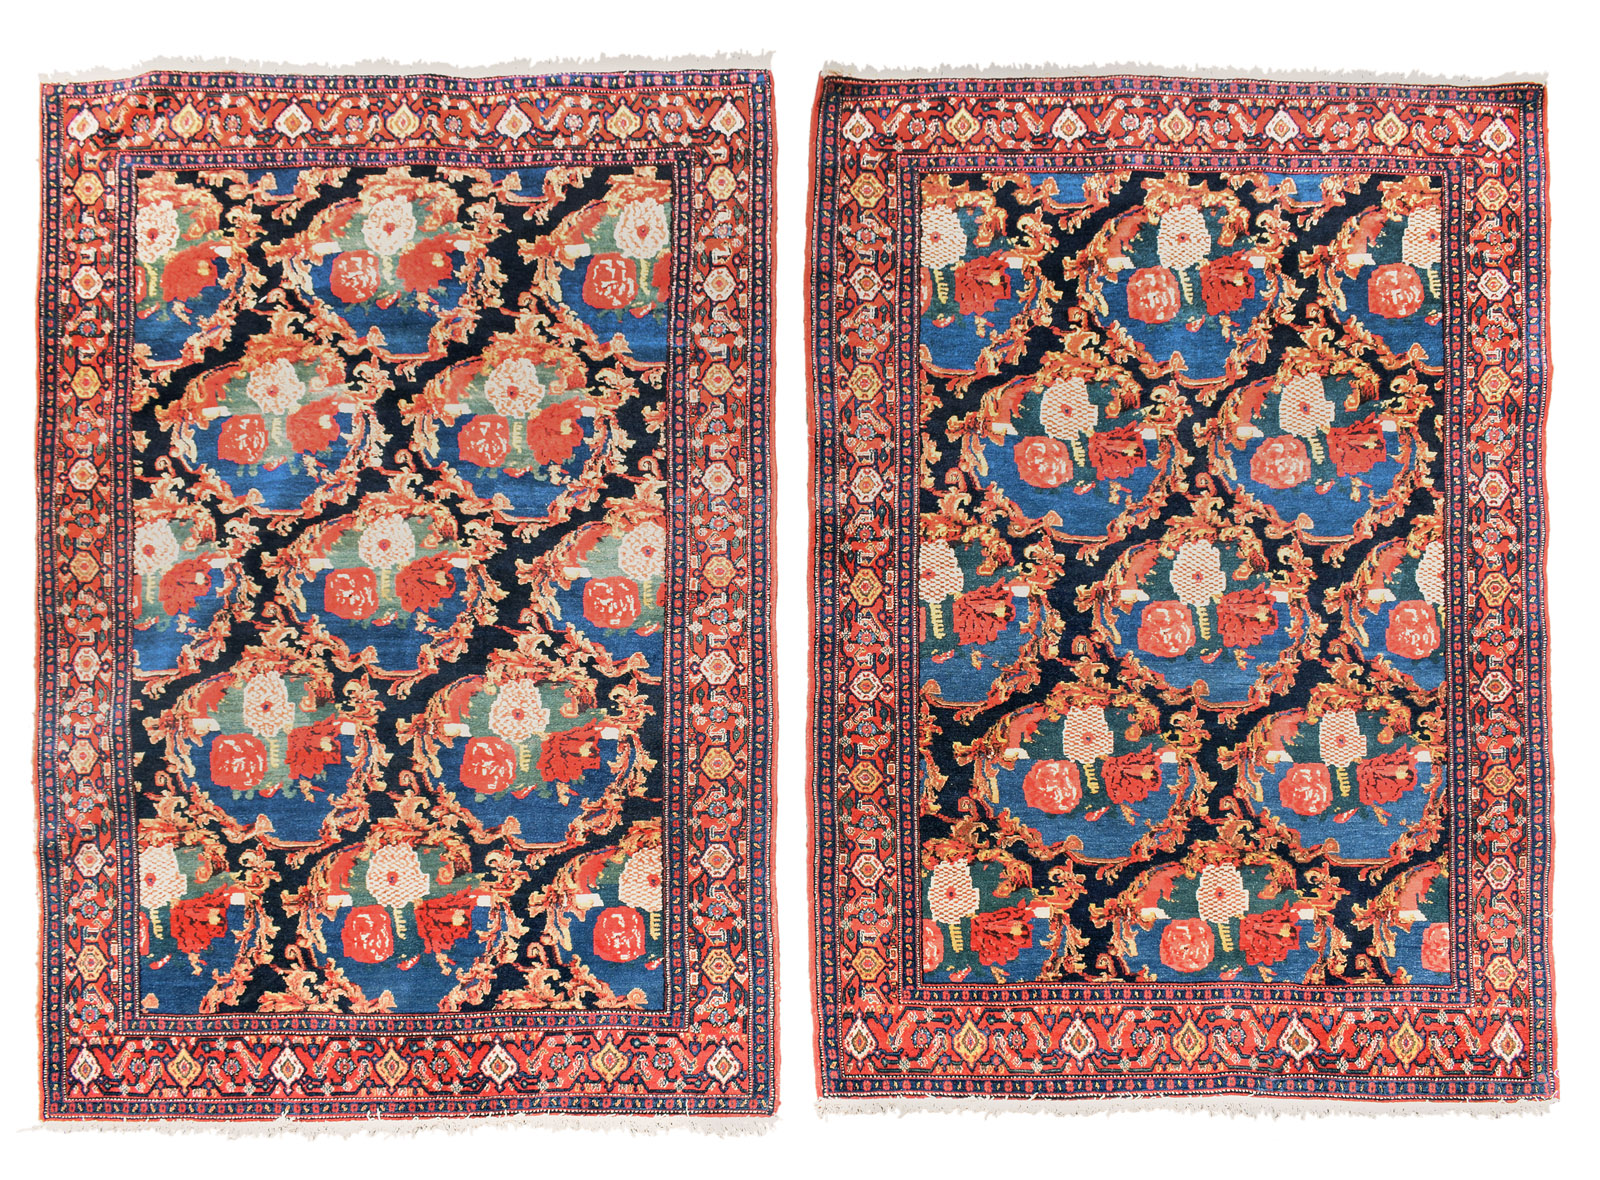 TWO SENNEH WITH ROSE PATTERN